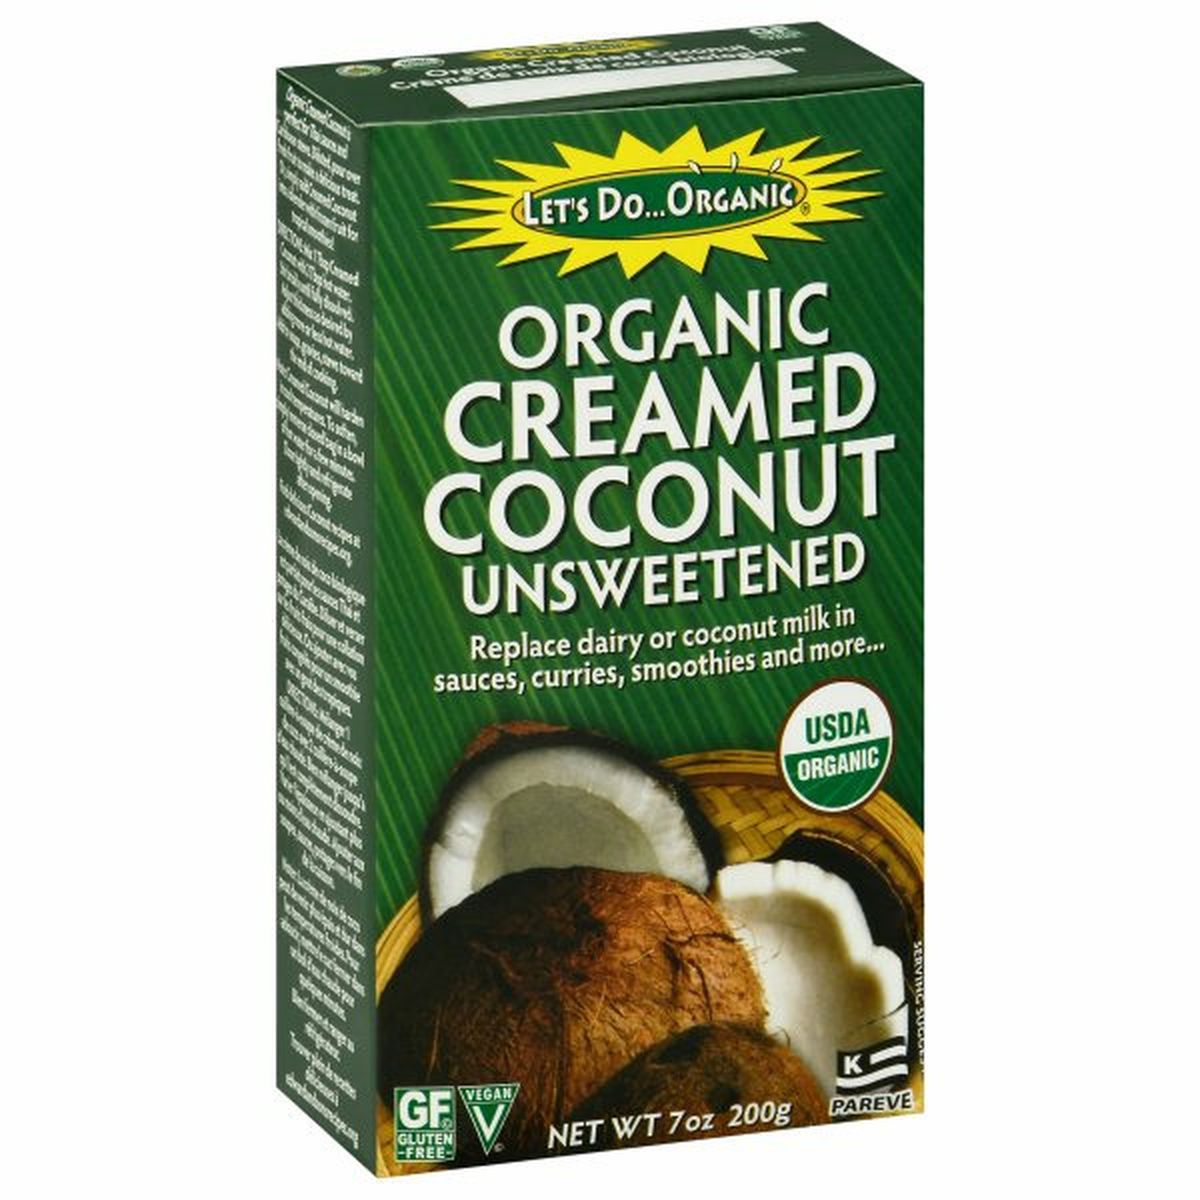 Calories in Let's Do Organic Creamed Coconut, Unsweetened